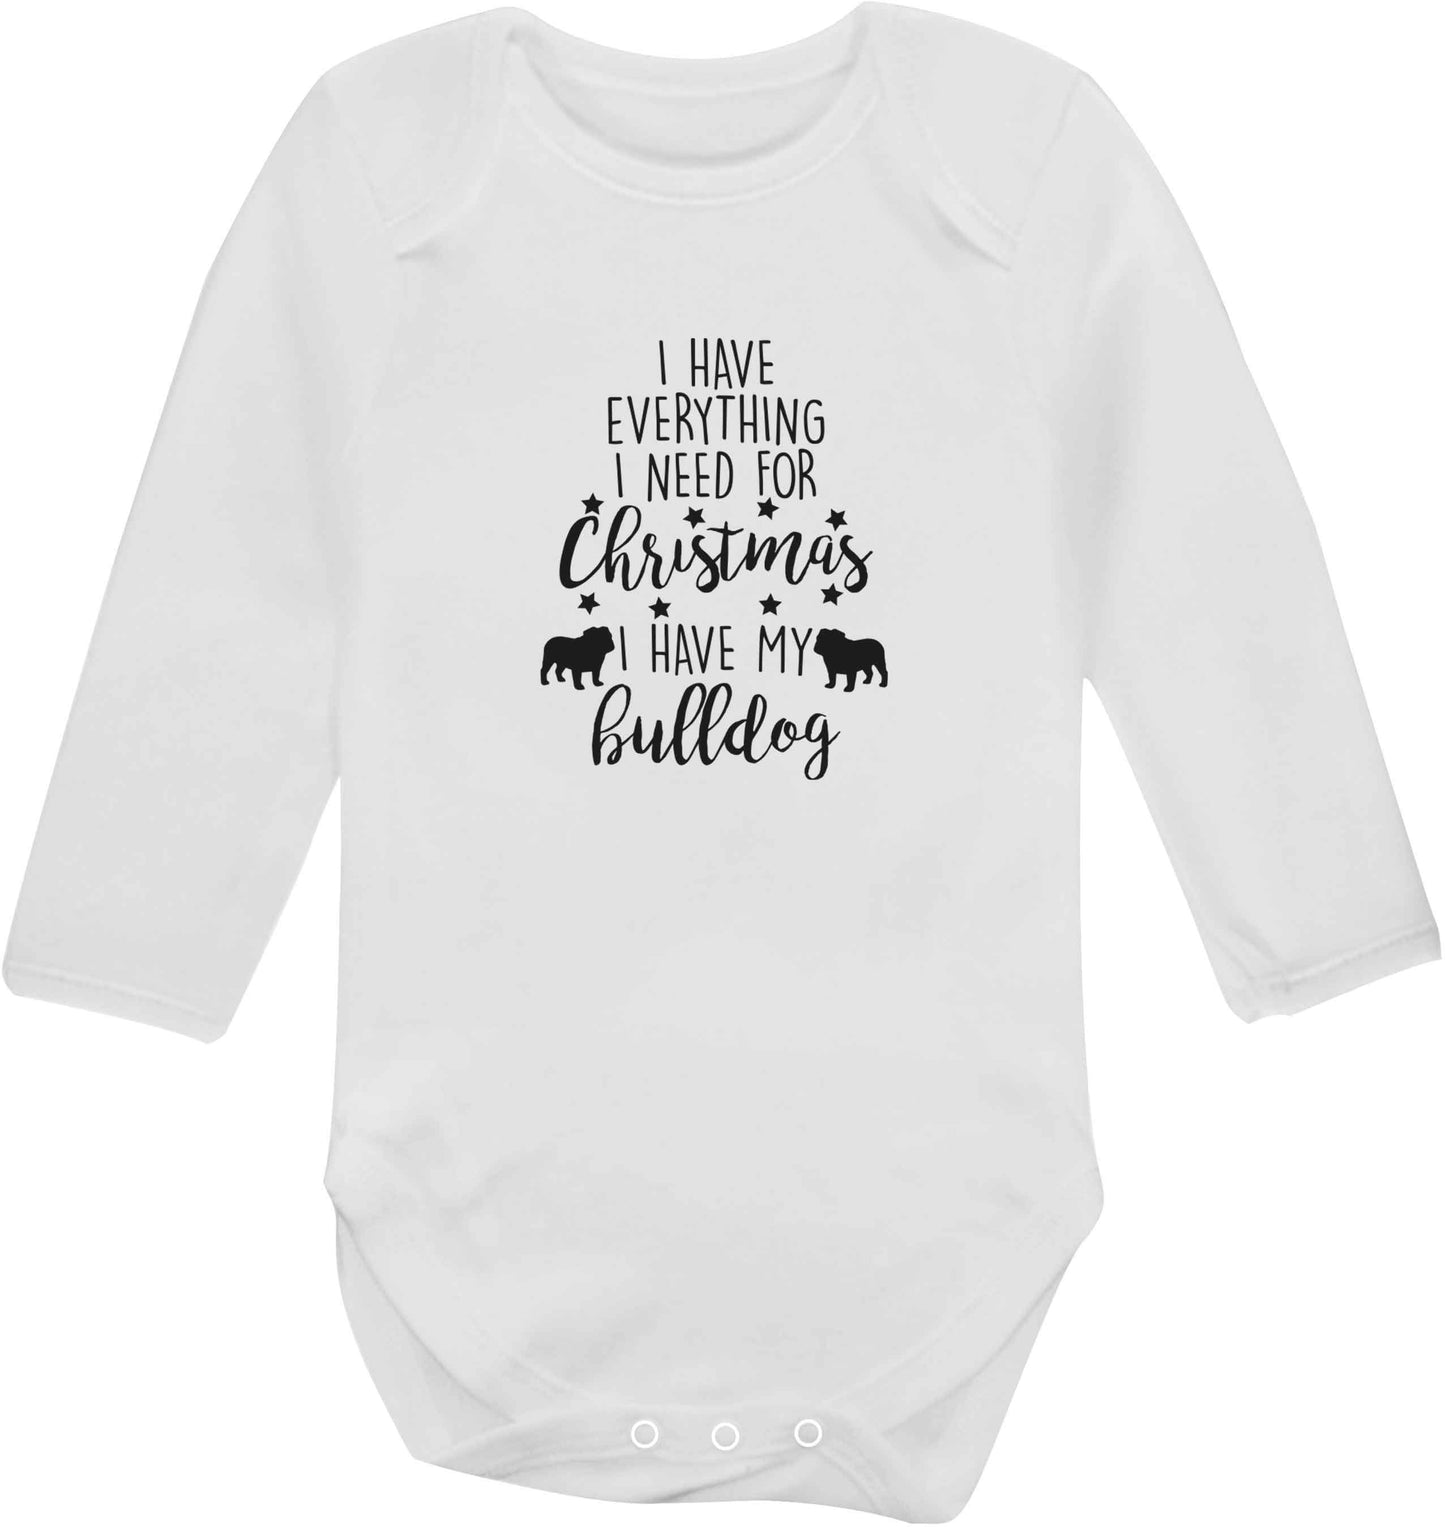 I have everything I need for Christmas I have my bulldog baby vest long sleeved white 6-12 months